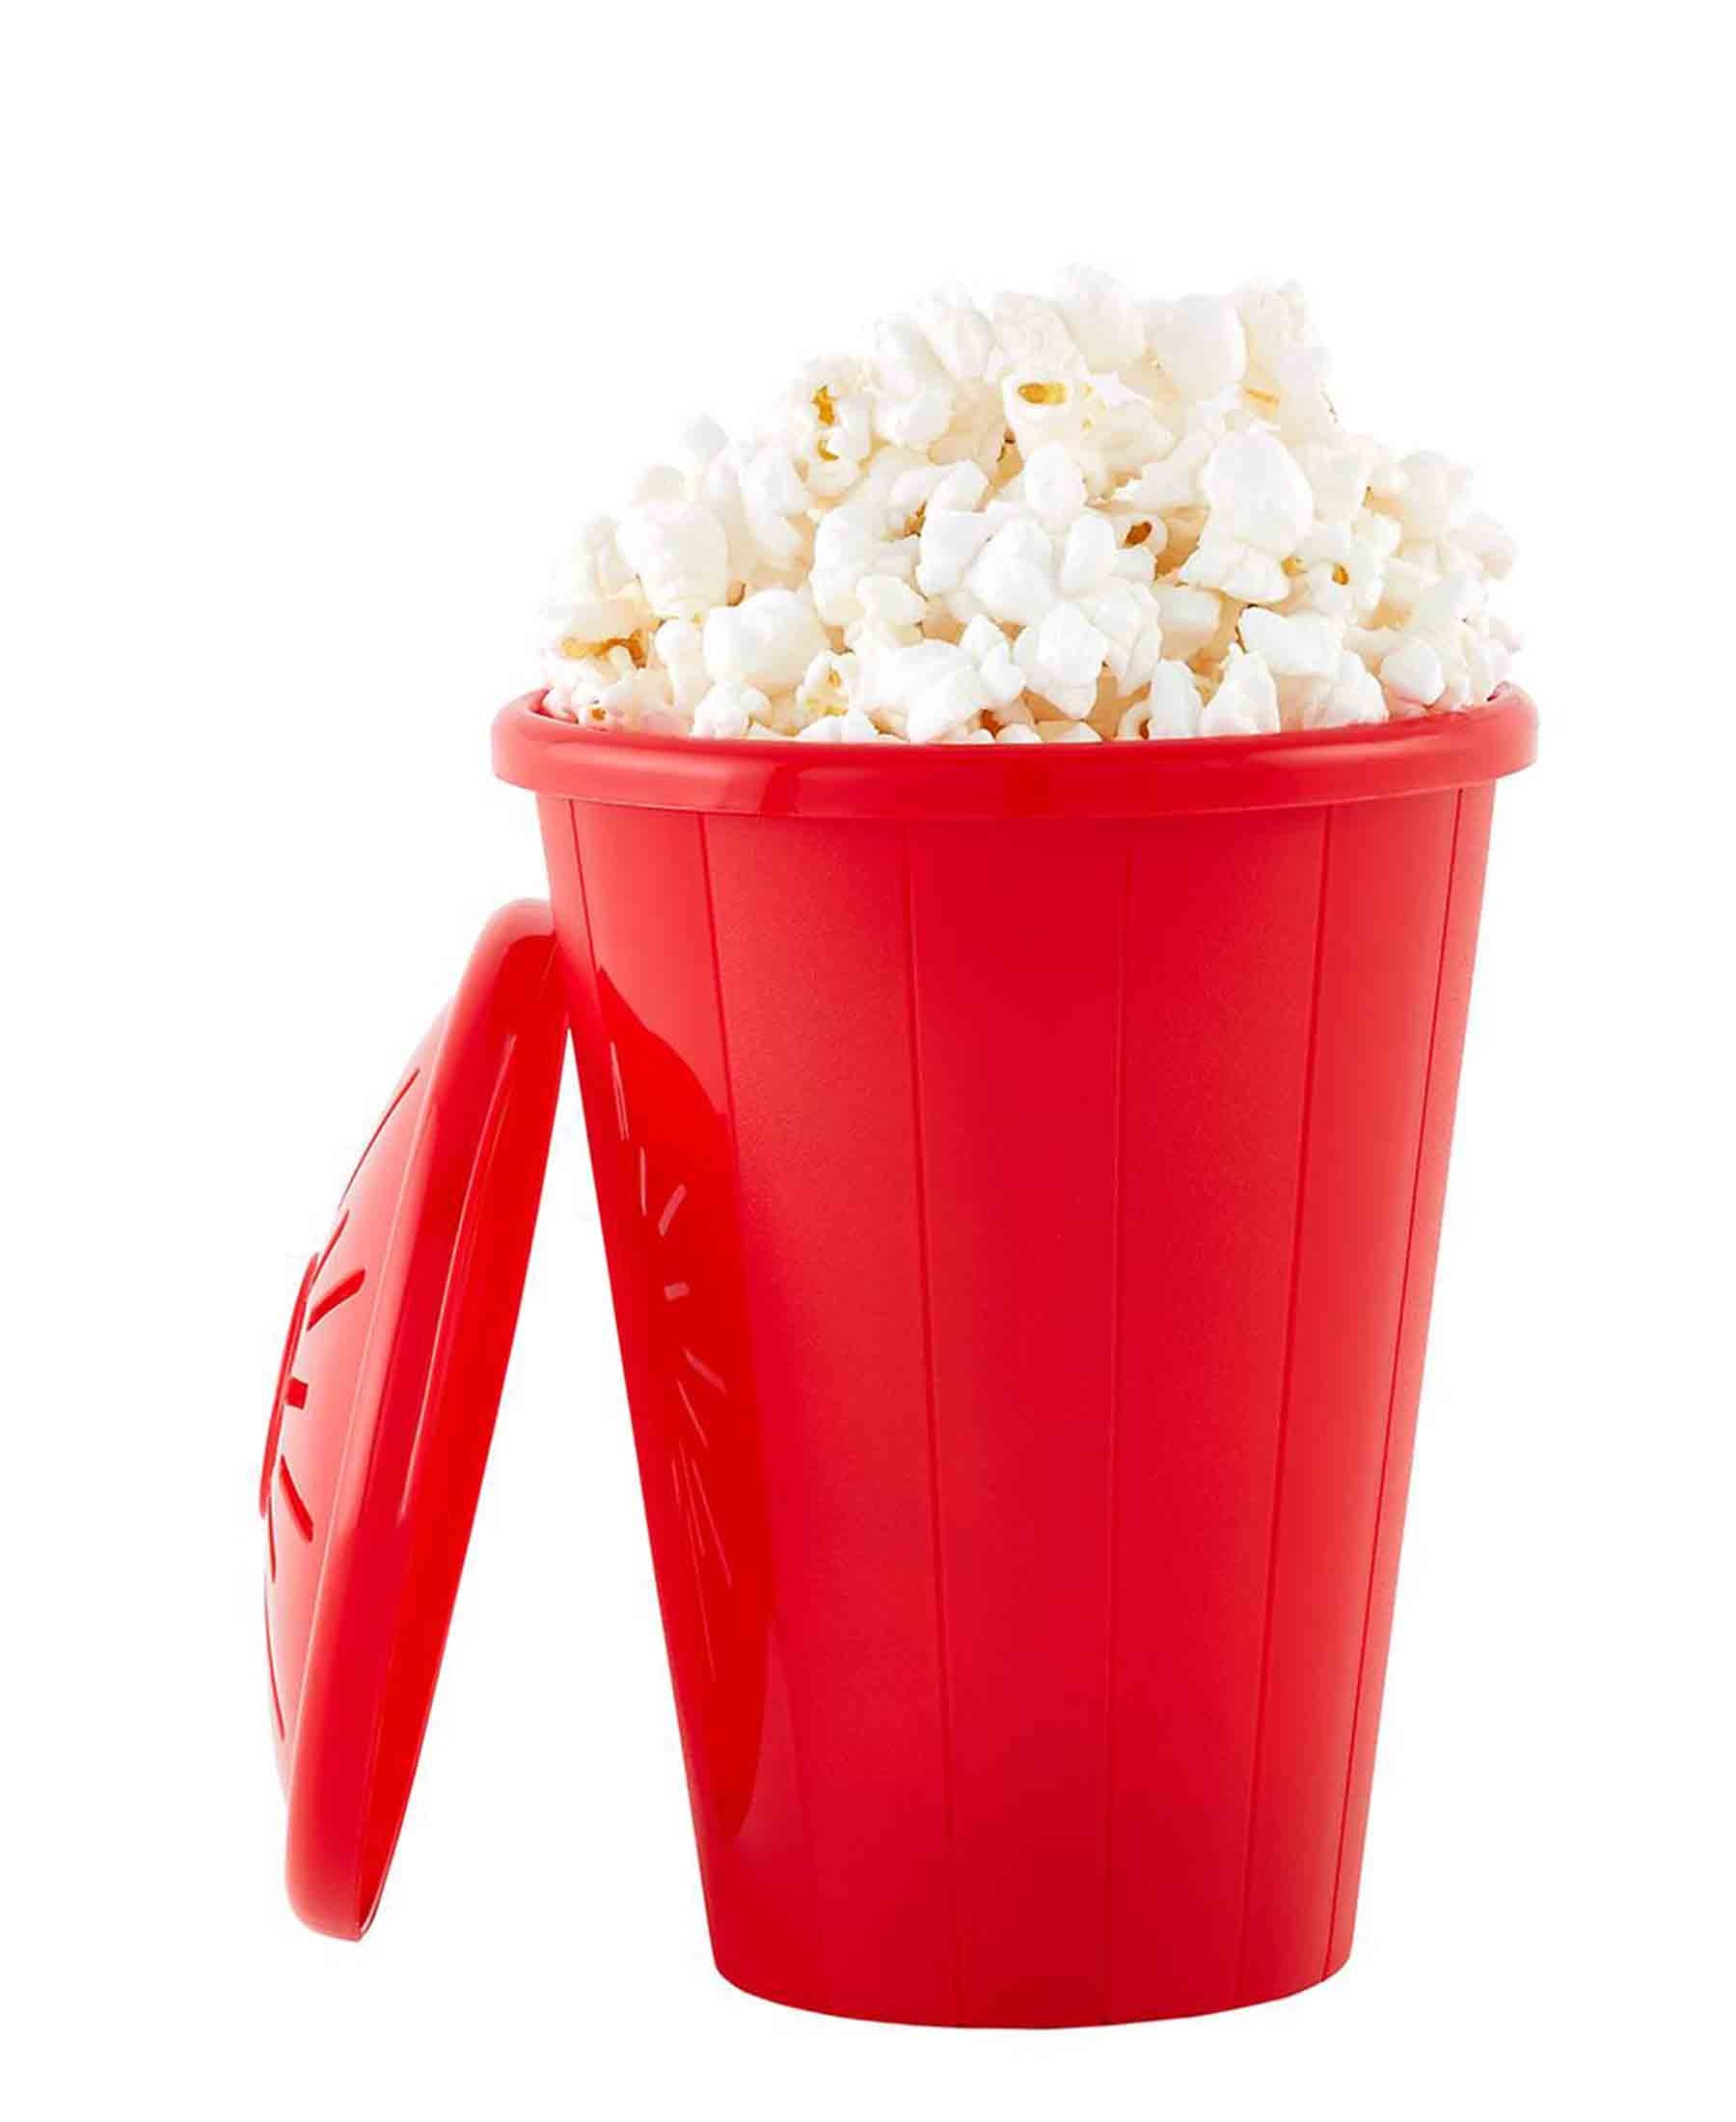 Joie Silicone Popcorn Maker - Red